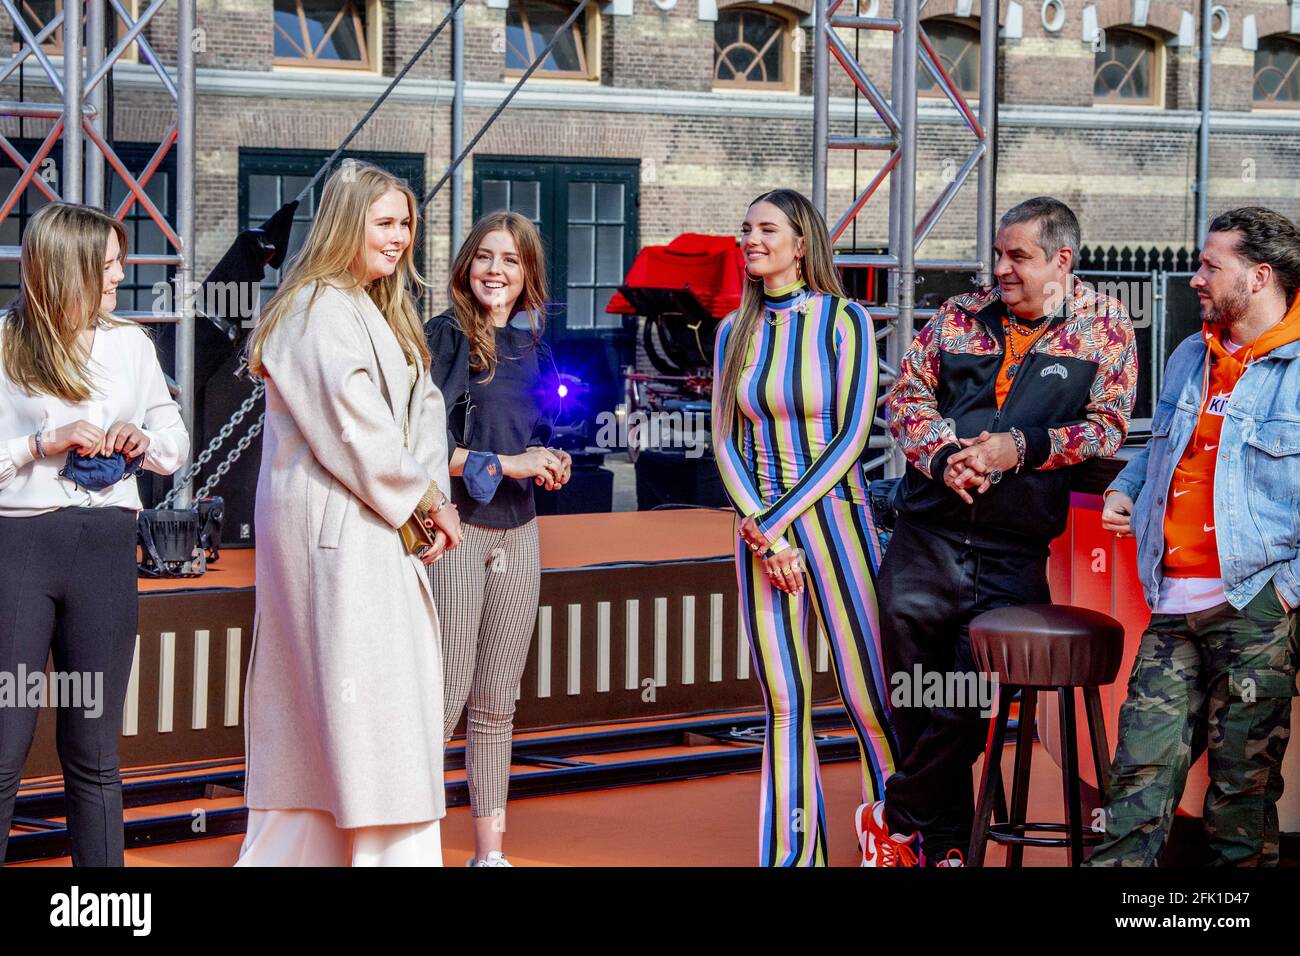 THE HAGUE - Royal Couple King Willem-Alexander and Queen Maxima and Princess Ariane Alexia and Amalia provide a stage for The Streamers' online concert on King's Day The Streamers consist of Guus Meeuwis, Rolf Sanchez, Kraantje Pappie, Suzan & Freek, VanVelzen, Davina Michelle, Paul de Munnik, Typhoon, Thomas Acda, Diggy Dex, Nick & Simon, Maan, Danny Vera, Miss Montreal and Paul de Leeuw. Band manager Frank Lammers is also present. netherlands Photo by Robin Utrecht/ABACAPRESS.COM Stock Photo